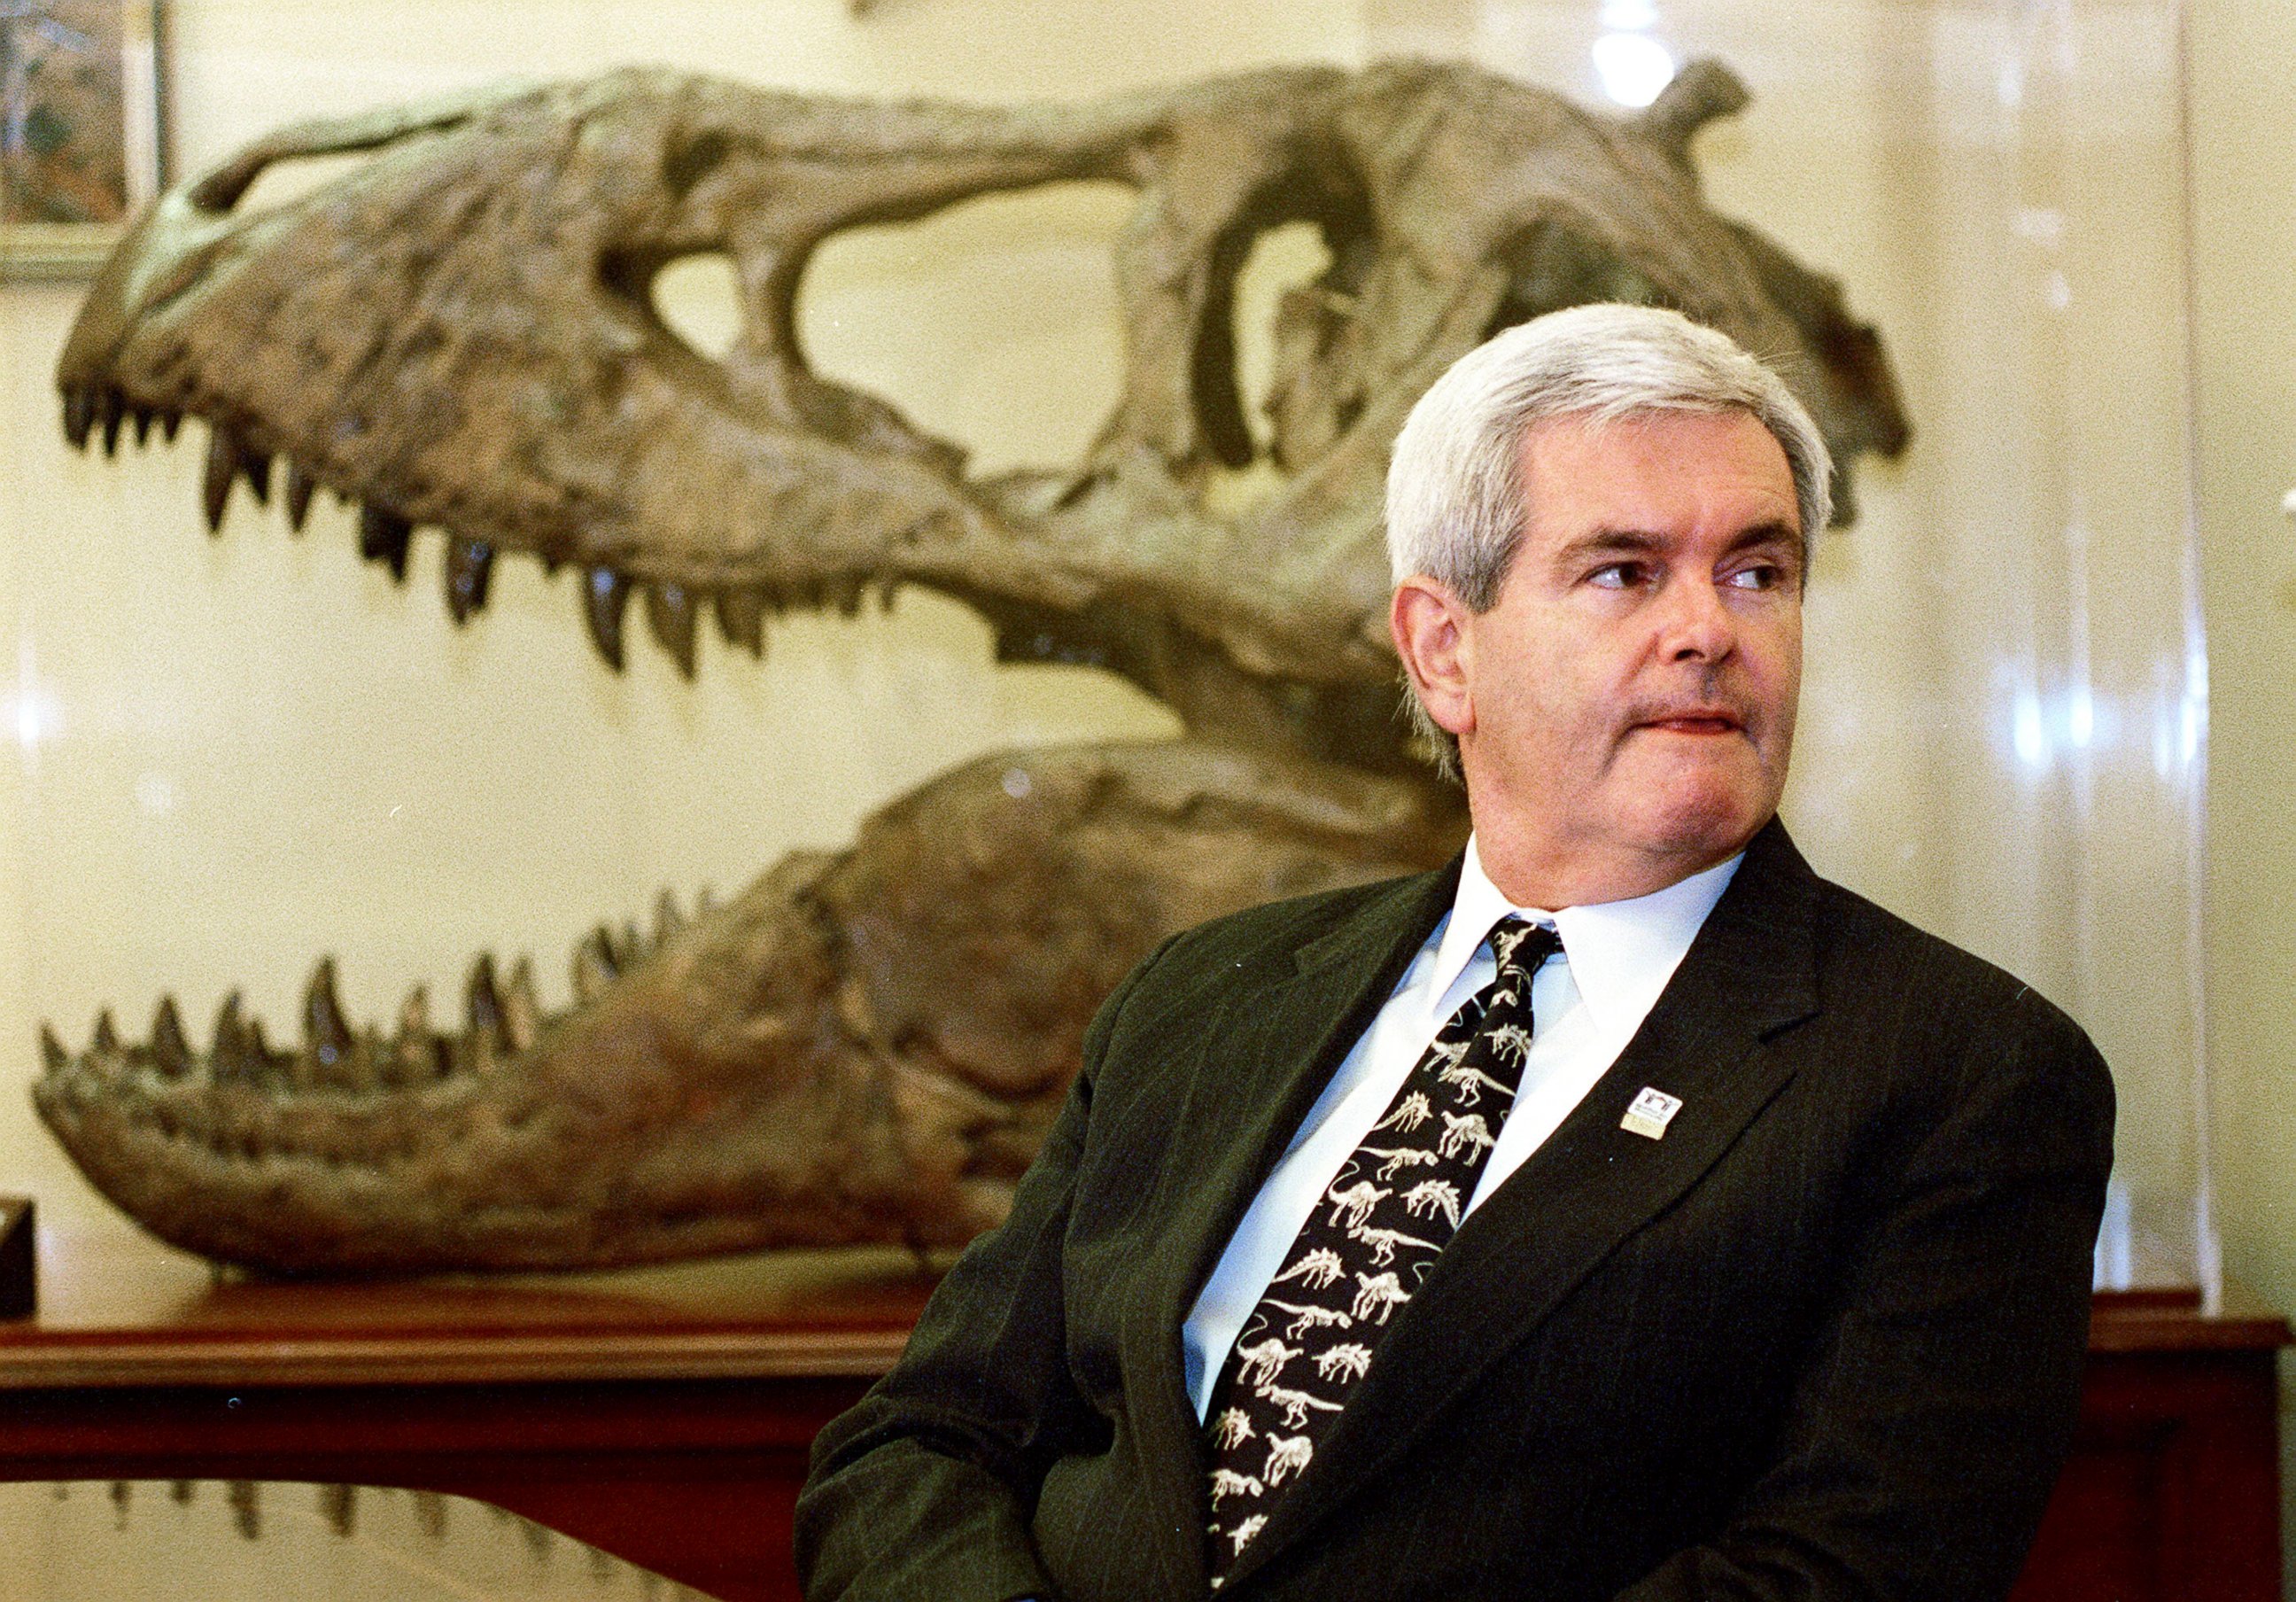 PHOTO: Speaker of the House Newt Gingrich in his office at the Capitol in Washington.